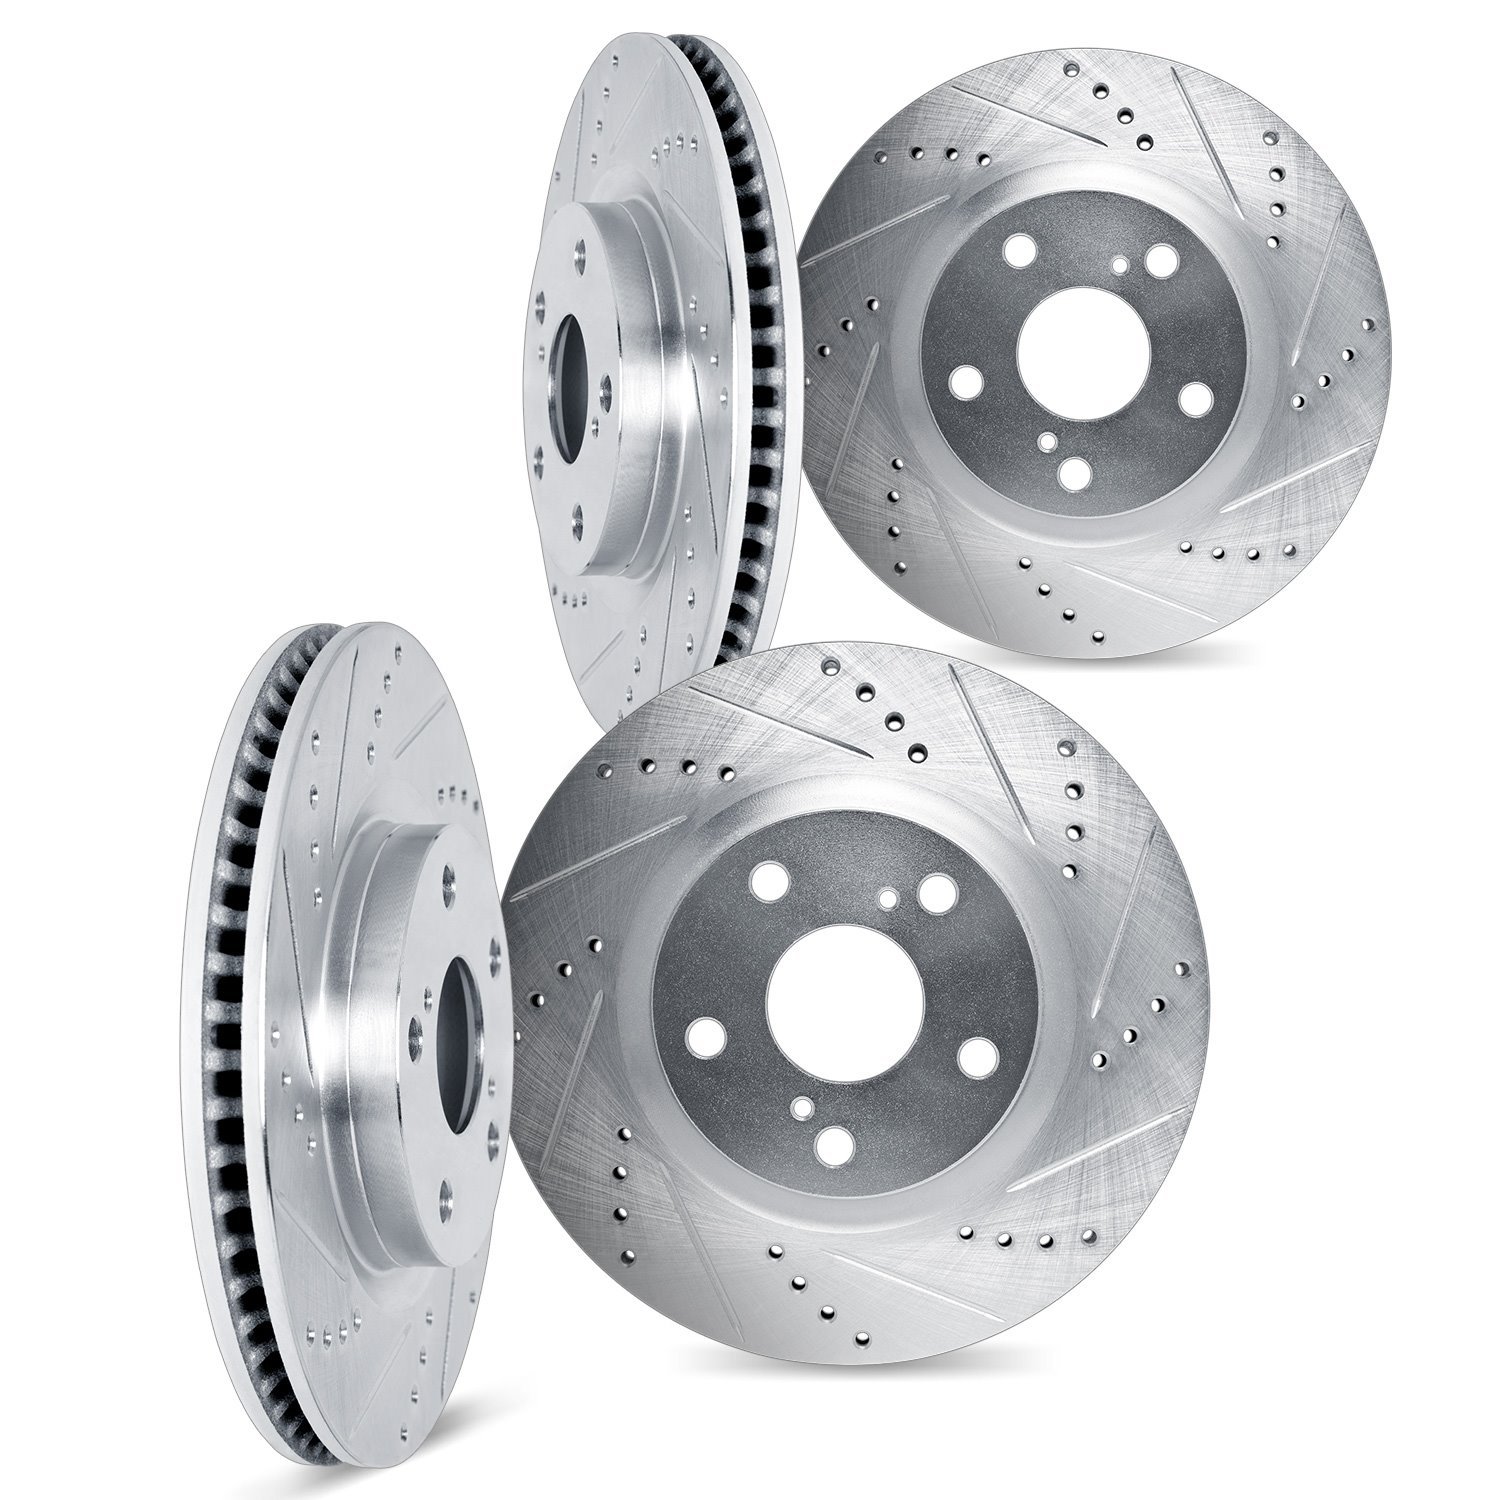 Drilled/Slotted Brake Rotors [Silver], Fits Select Land Rover